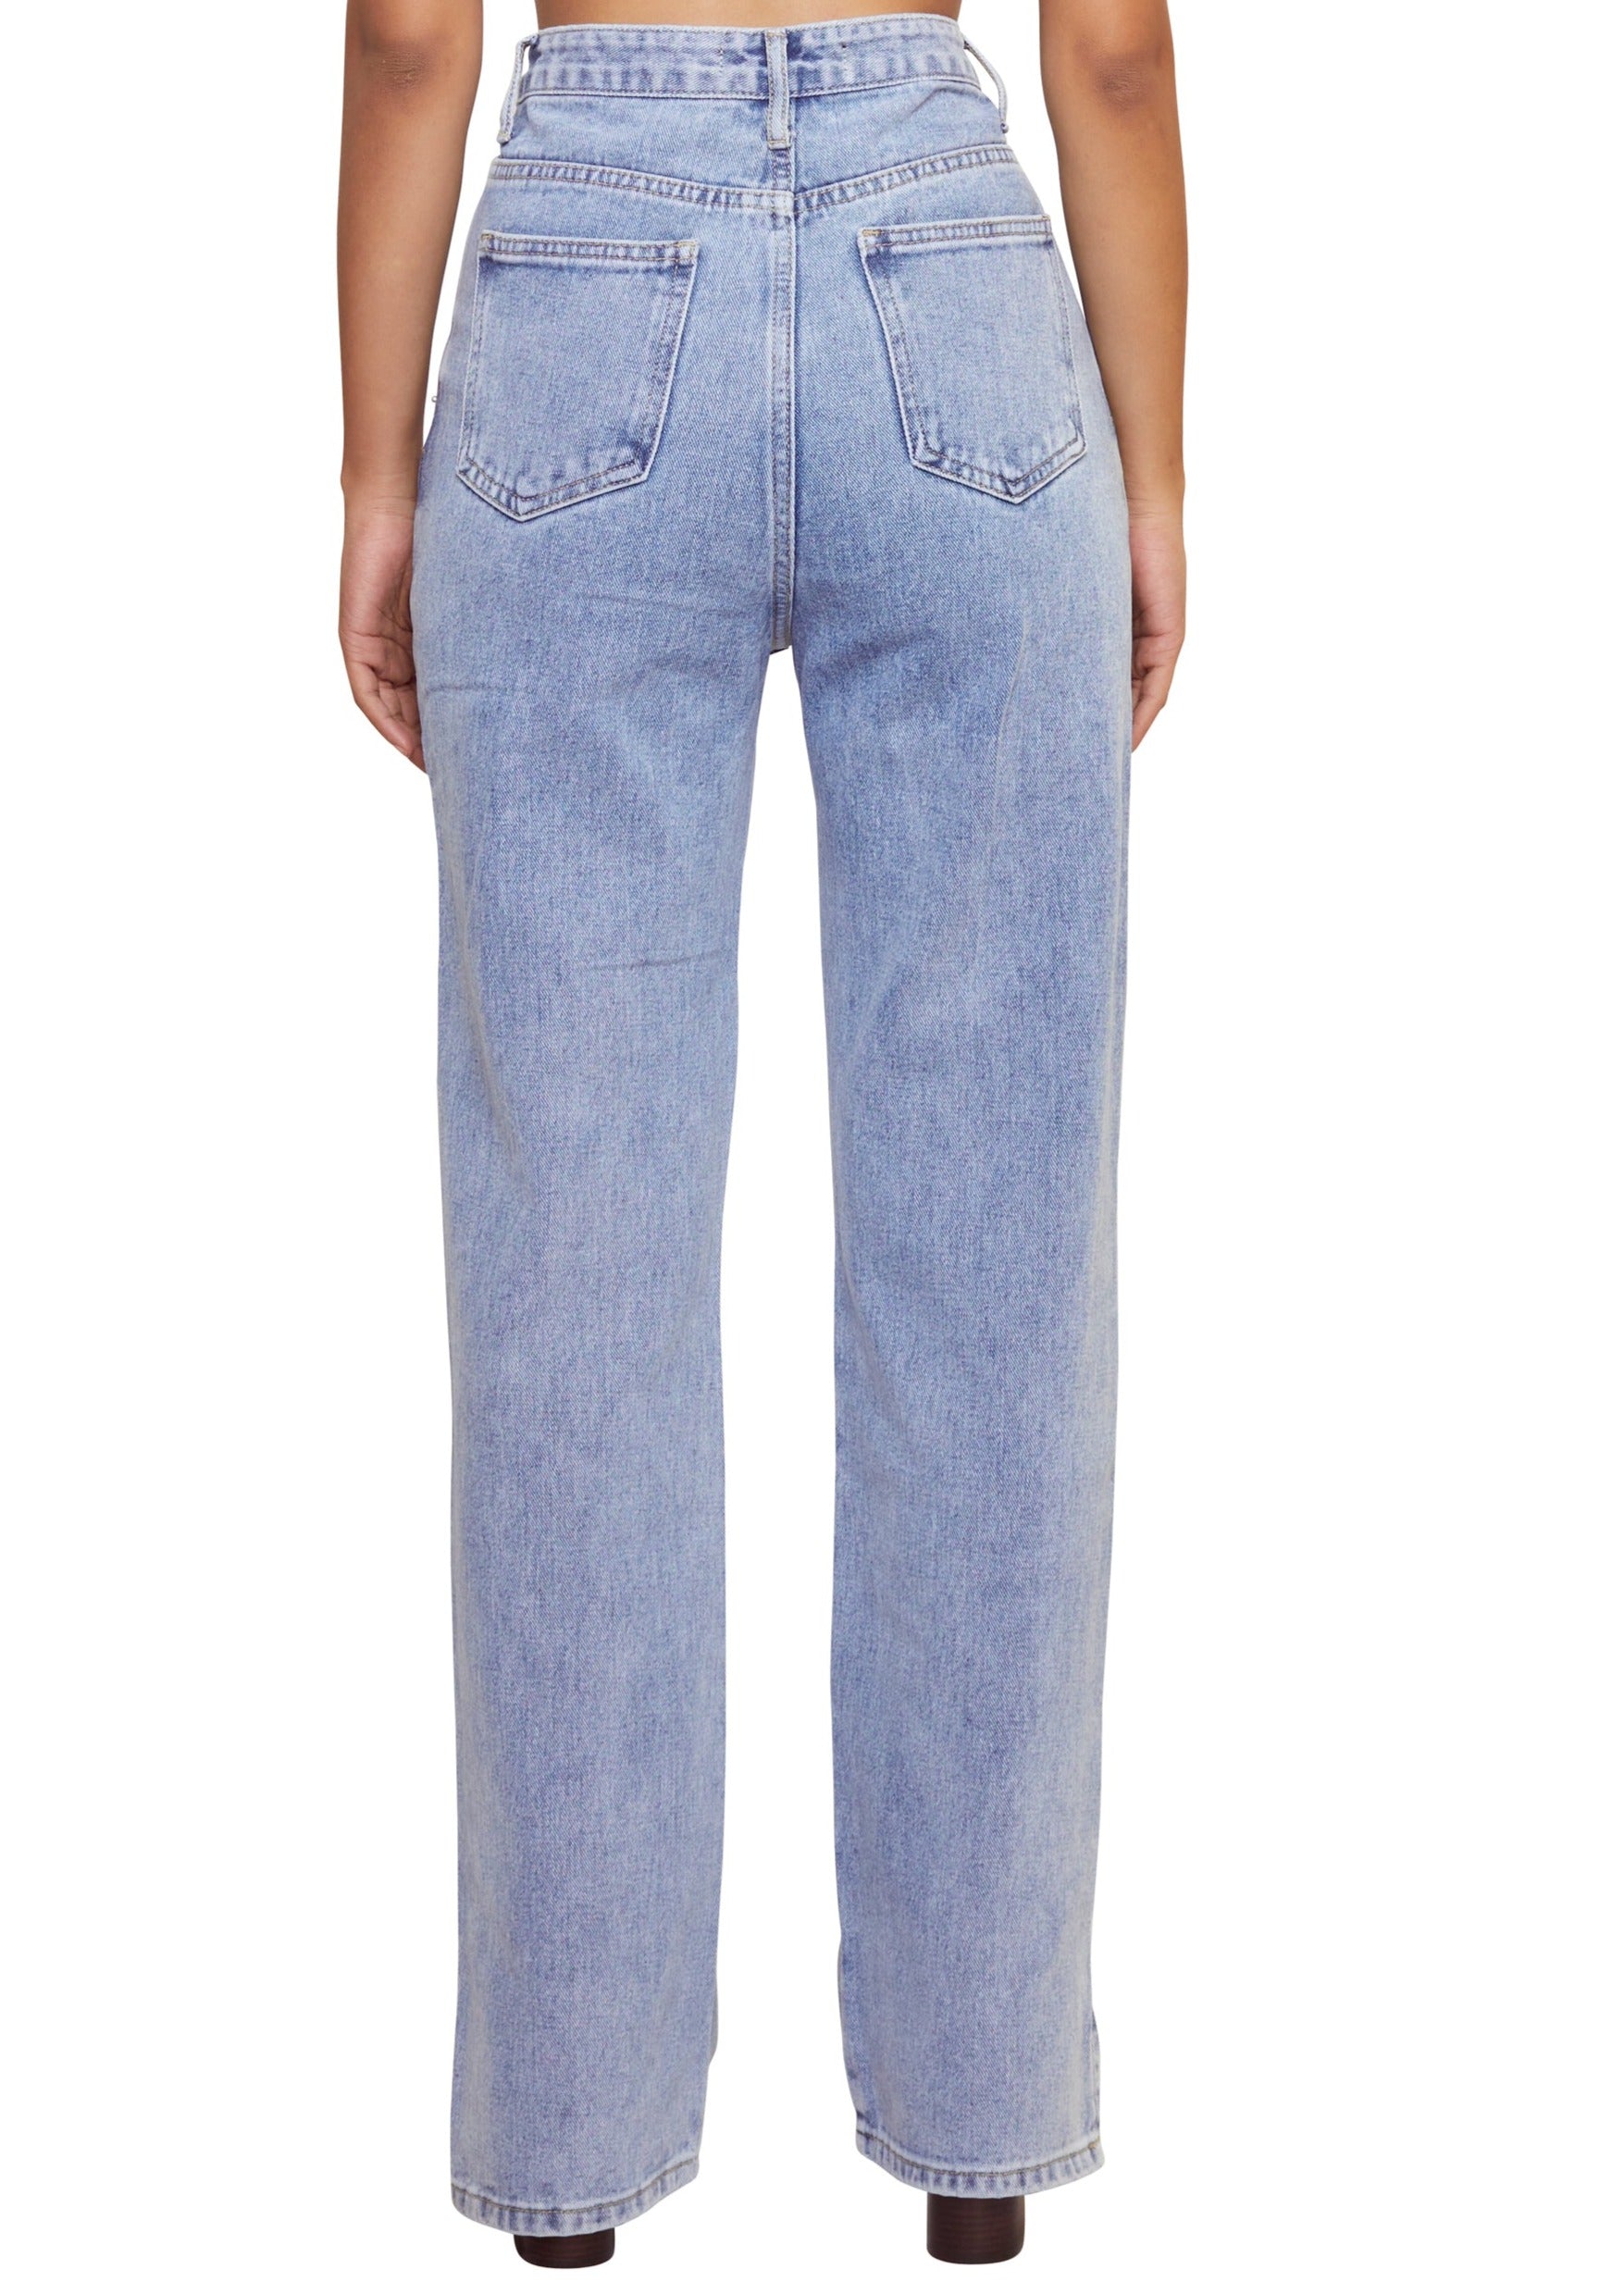 Blue high waisted straight jeans with two buttons and a criss cross waistline pattern from the brand The Kript